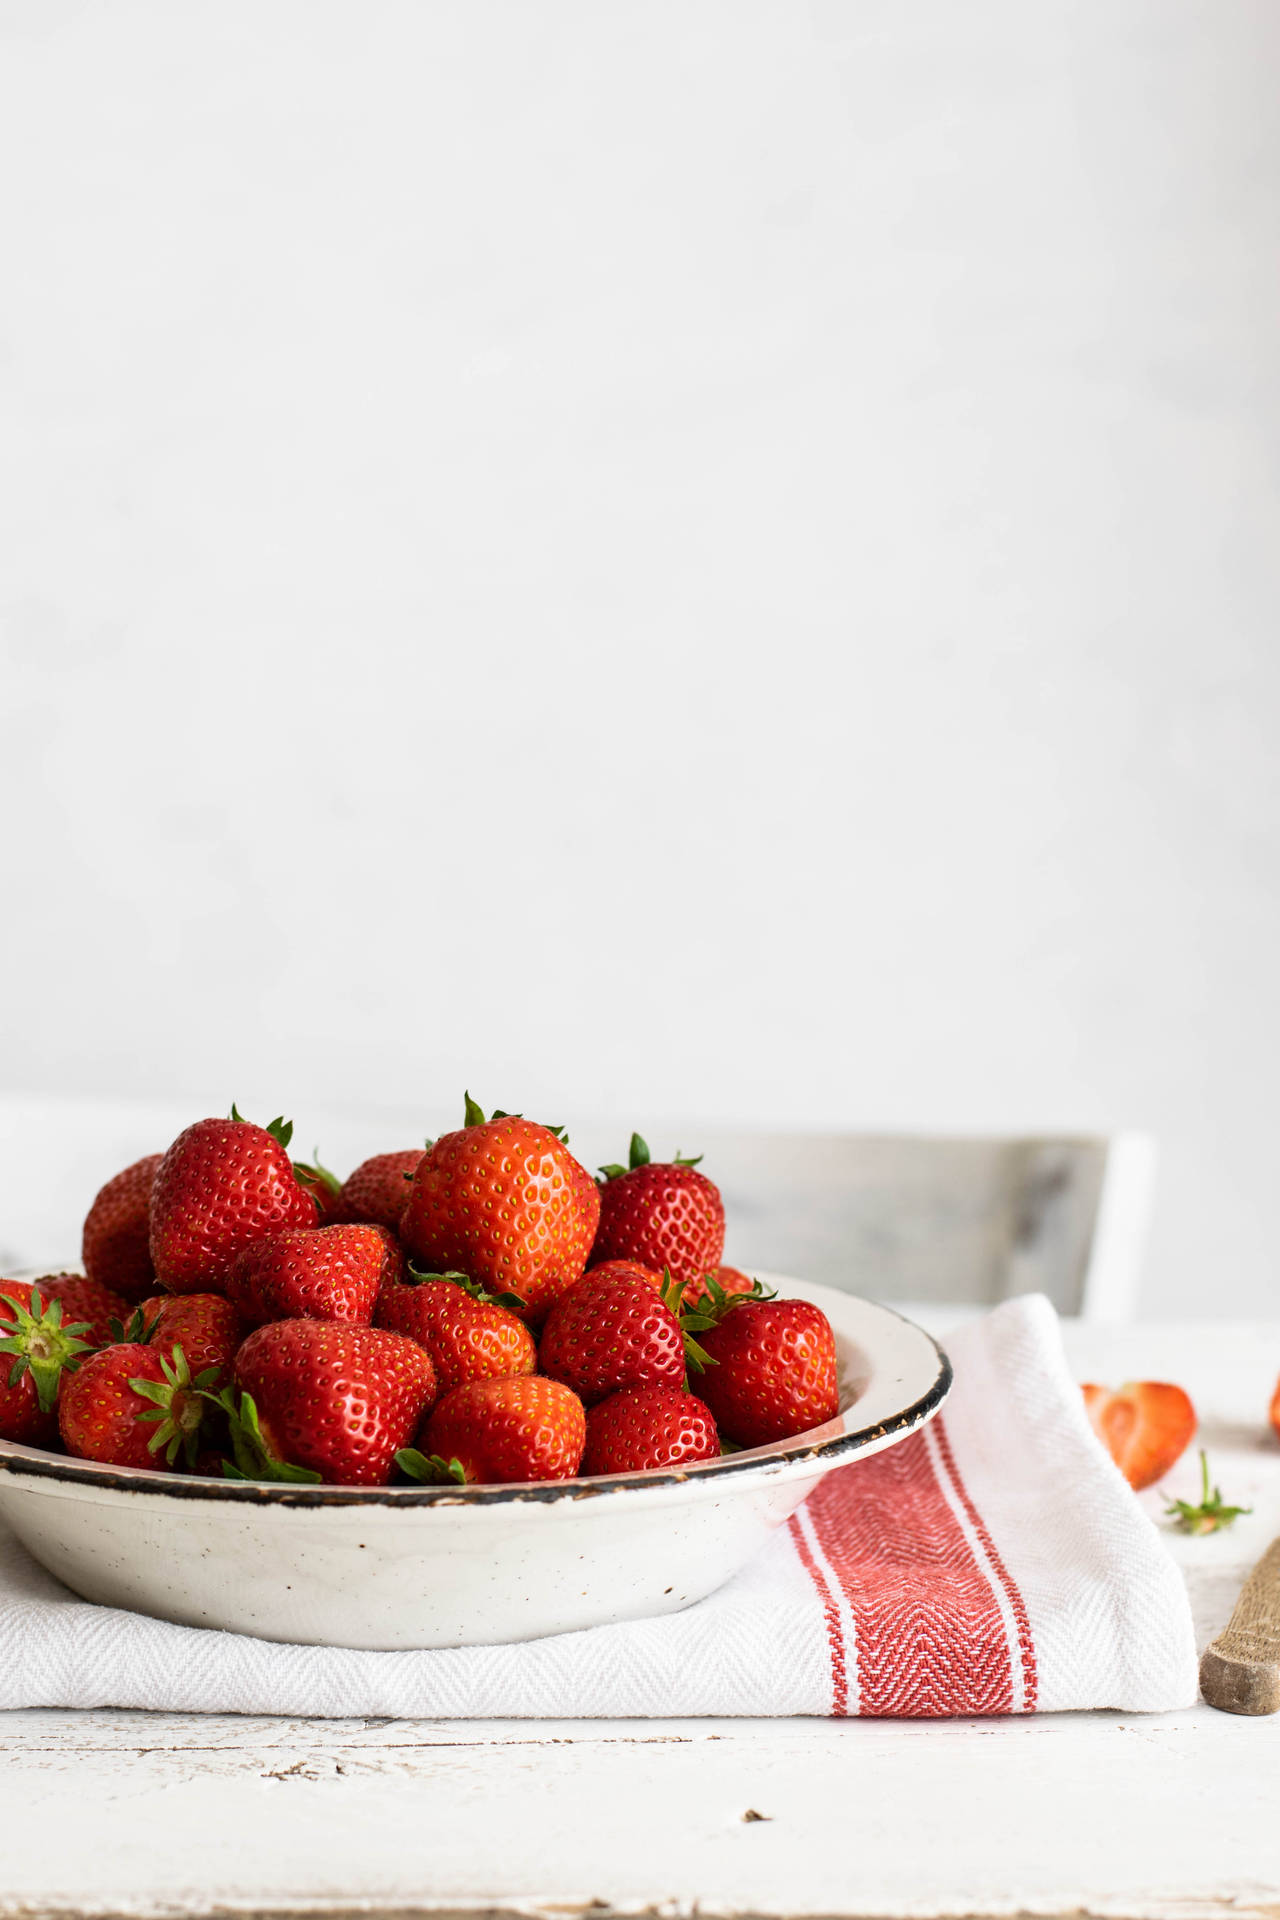 Strawberry 3923X5884 Wallpaper and Background Image